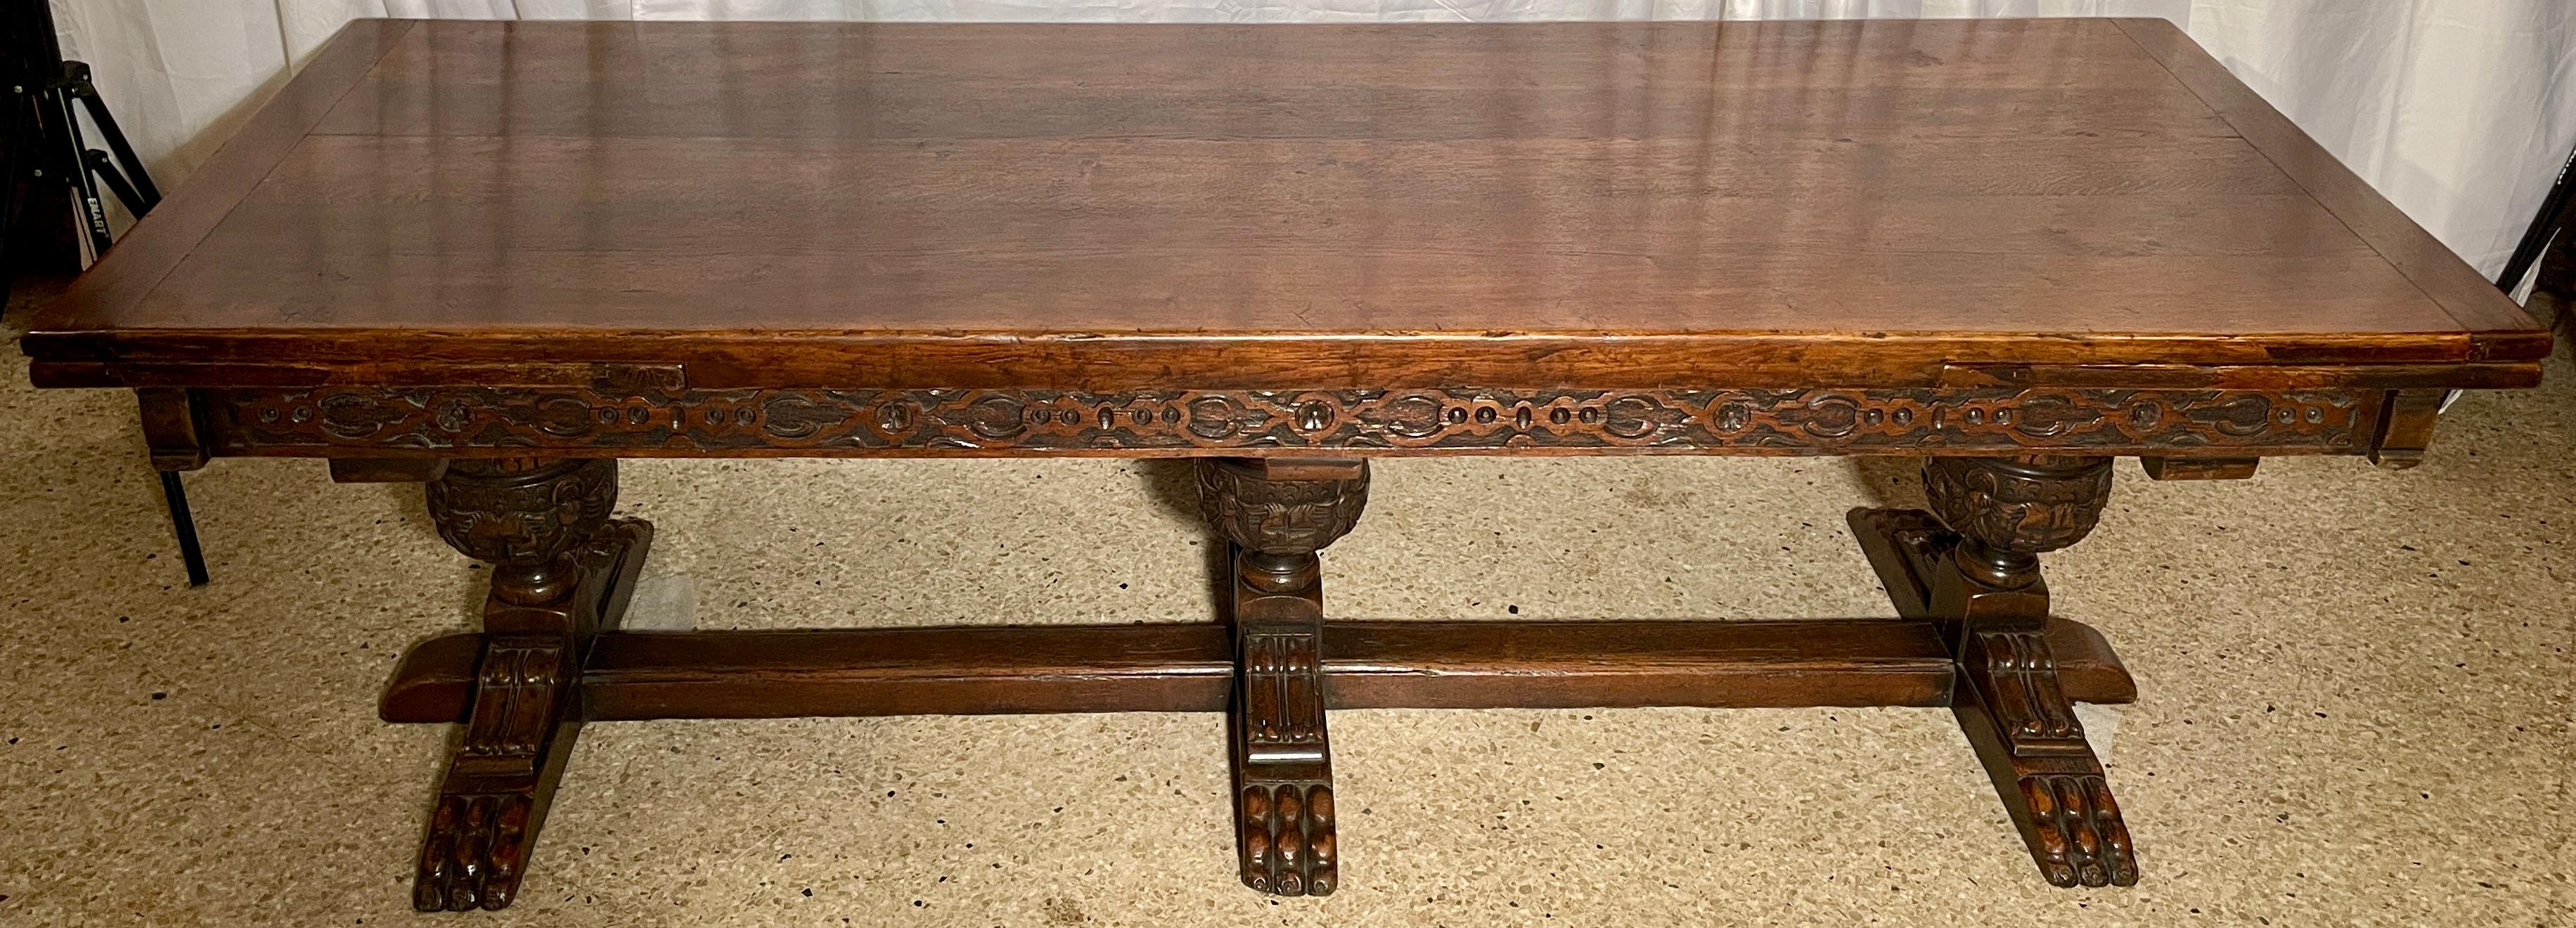 Antique English Elizabethan style extension trestle table, over 100 years old.
 